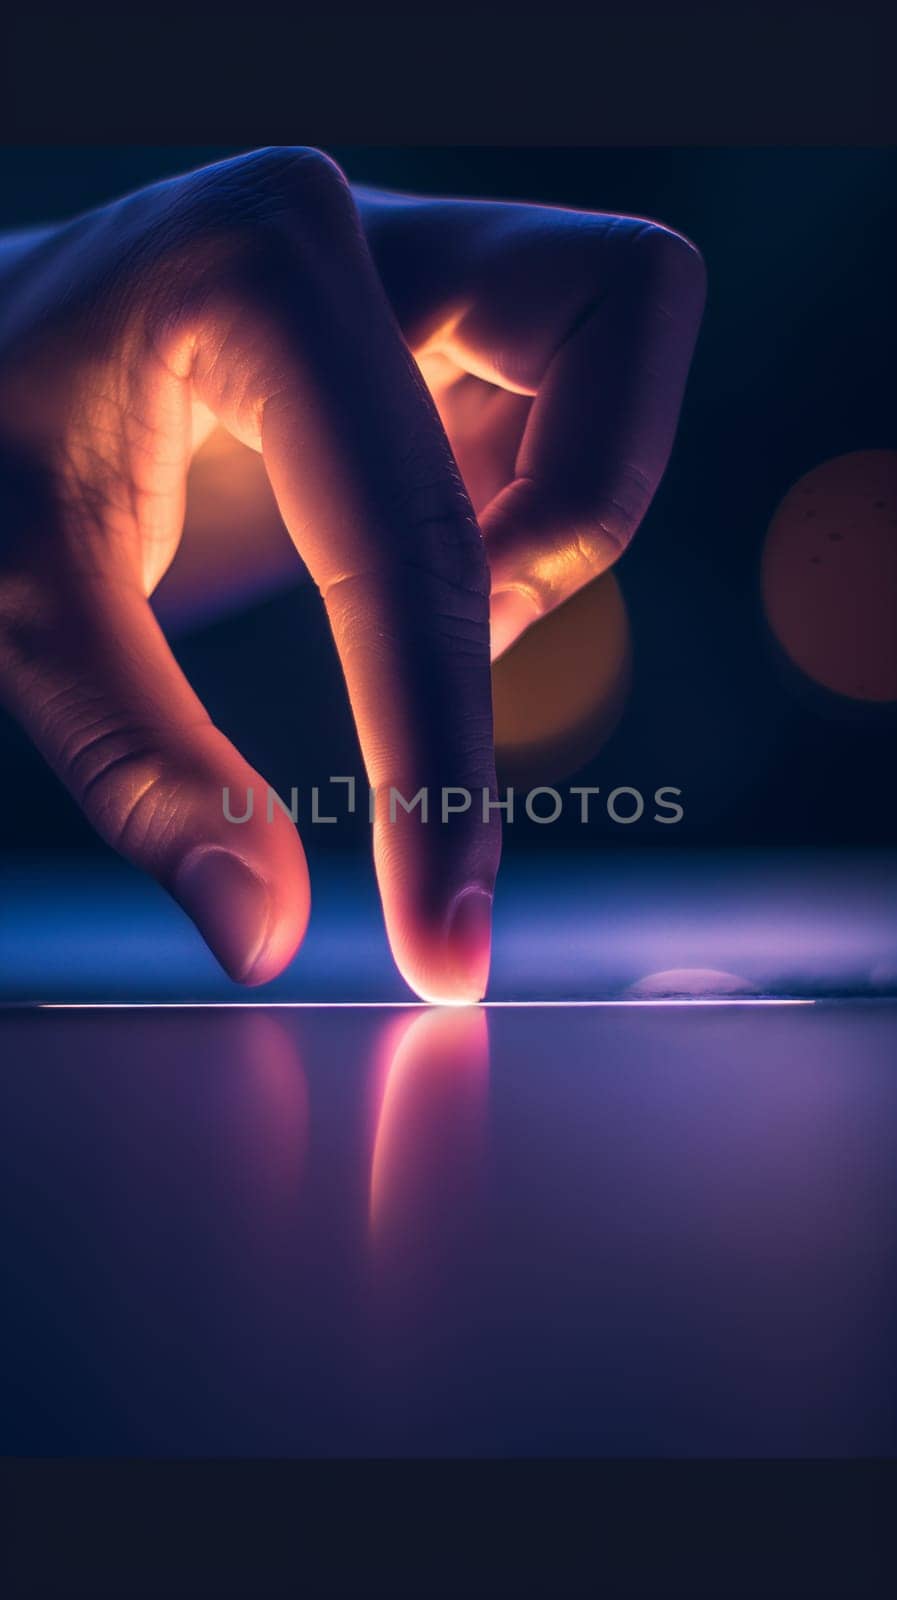 Hand Touching Tablet Screen in Low Light by chrisroll